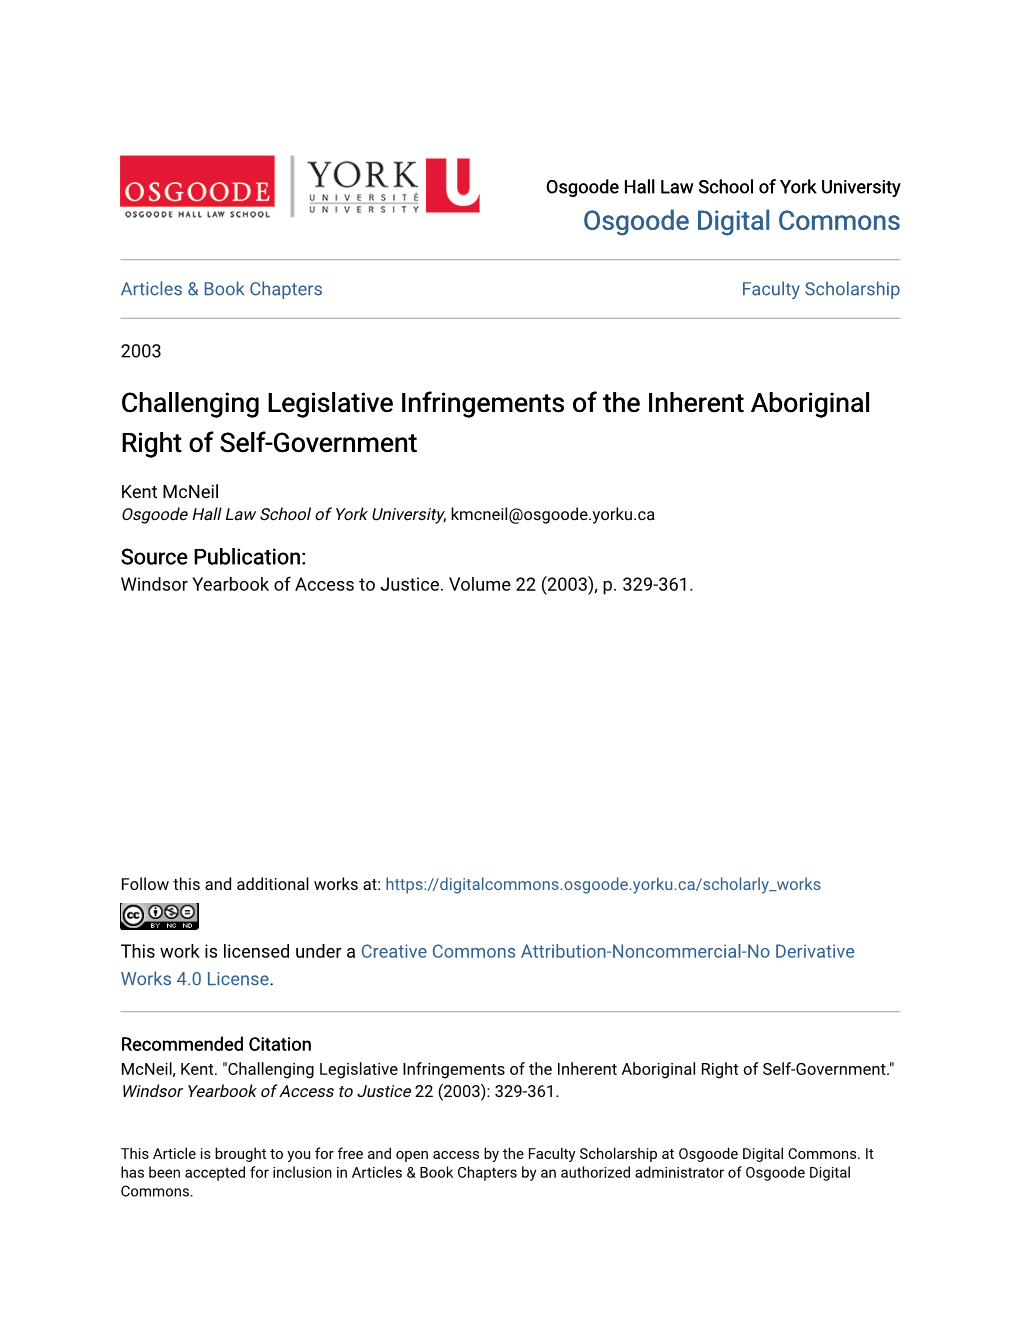 Challenging Legislative Infringements of the Inherent Aboriginal Right of Self-Government